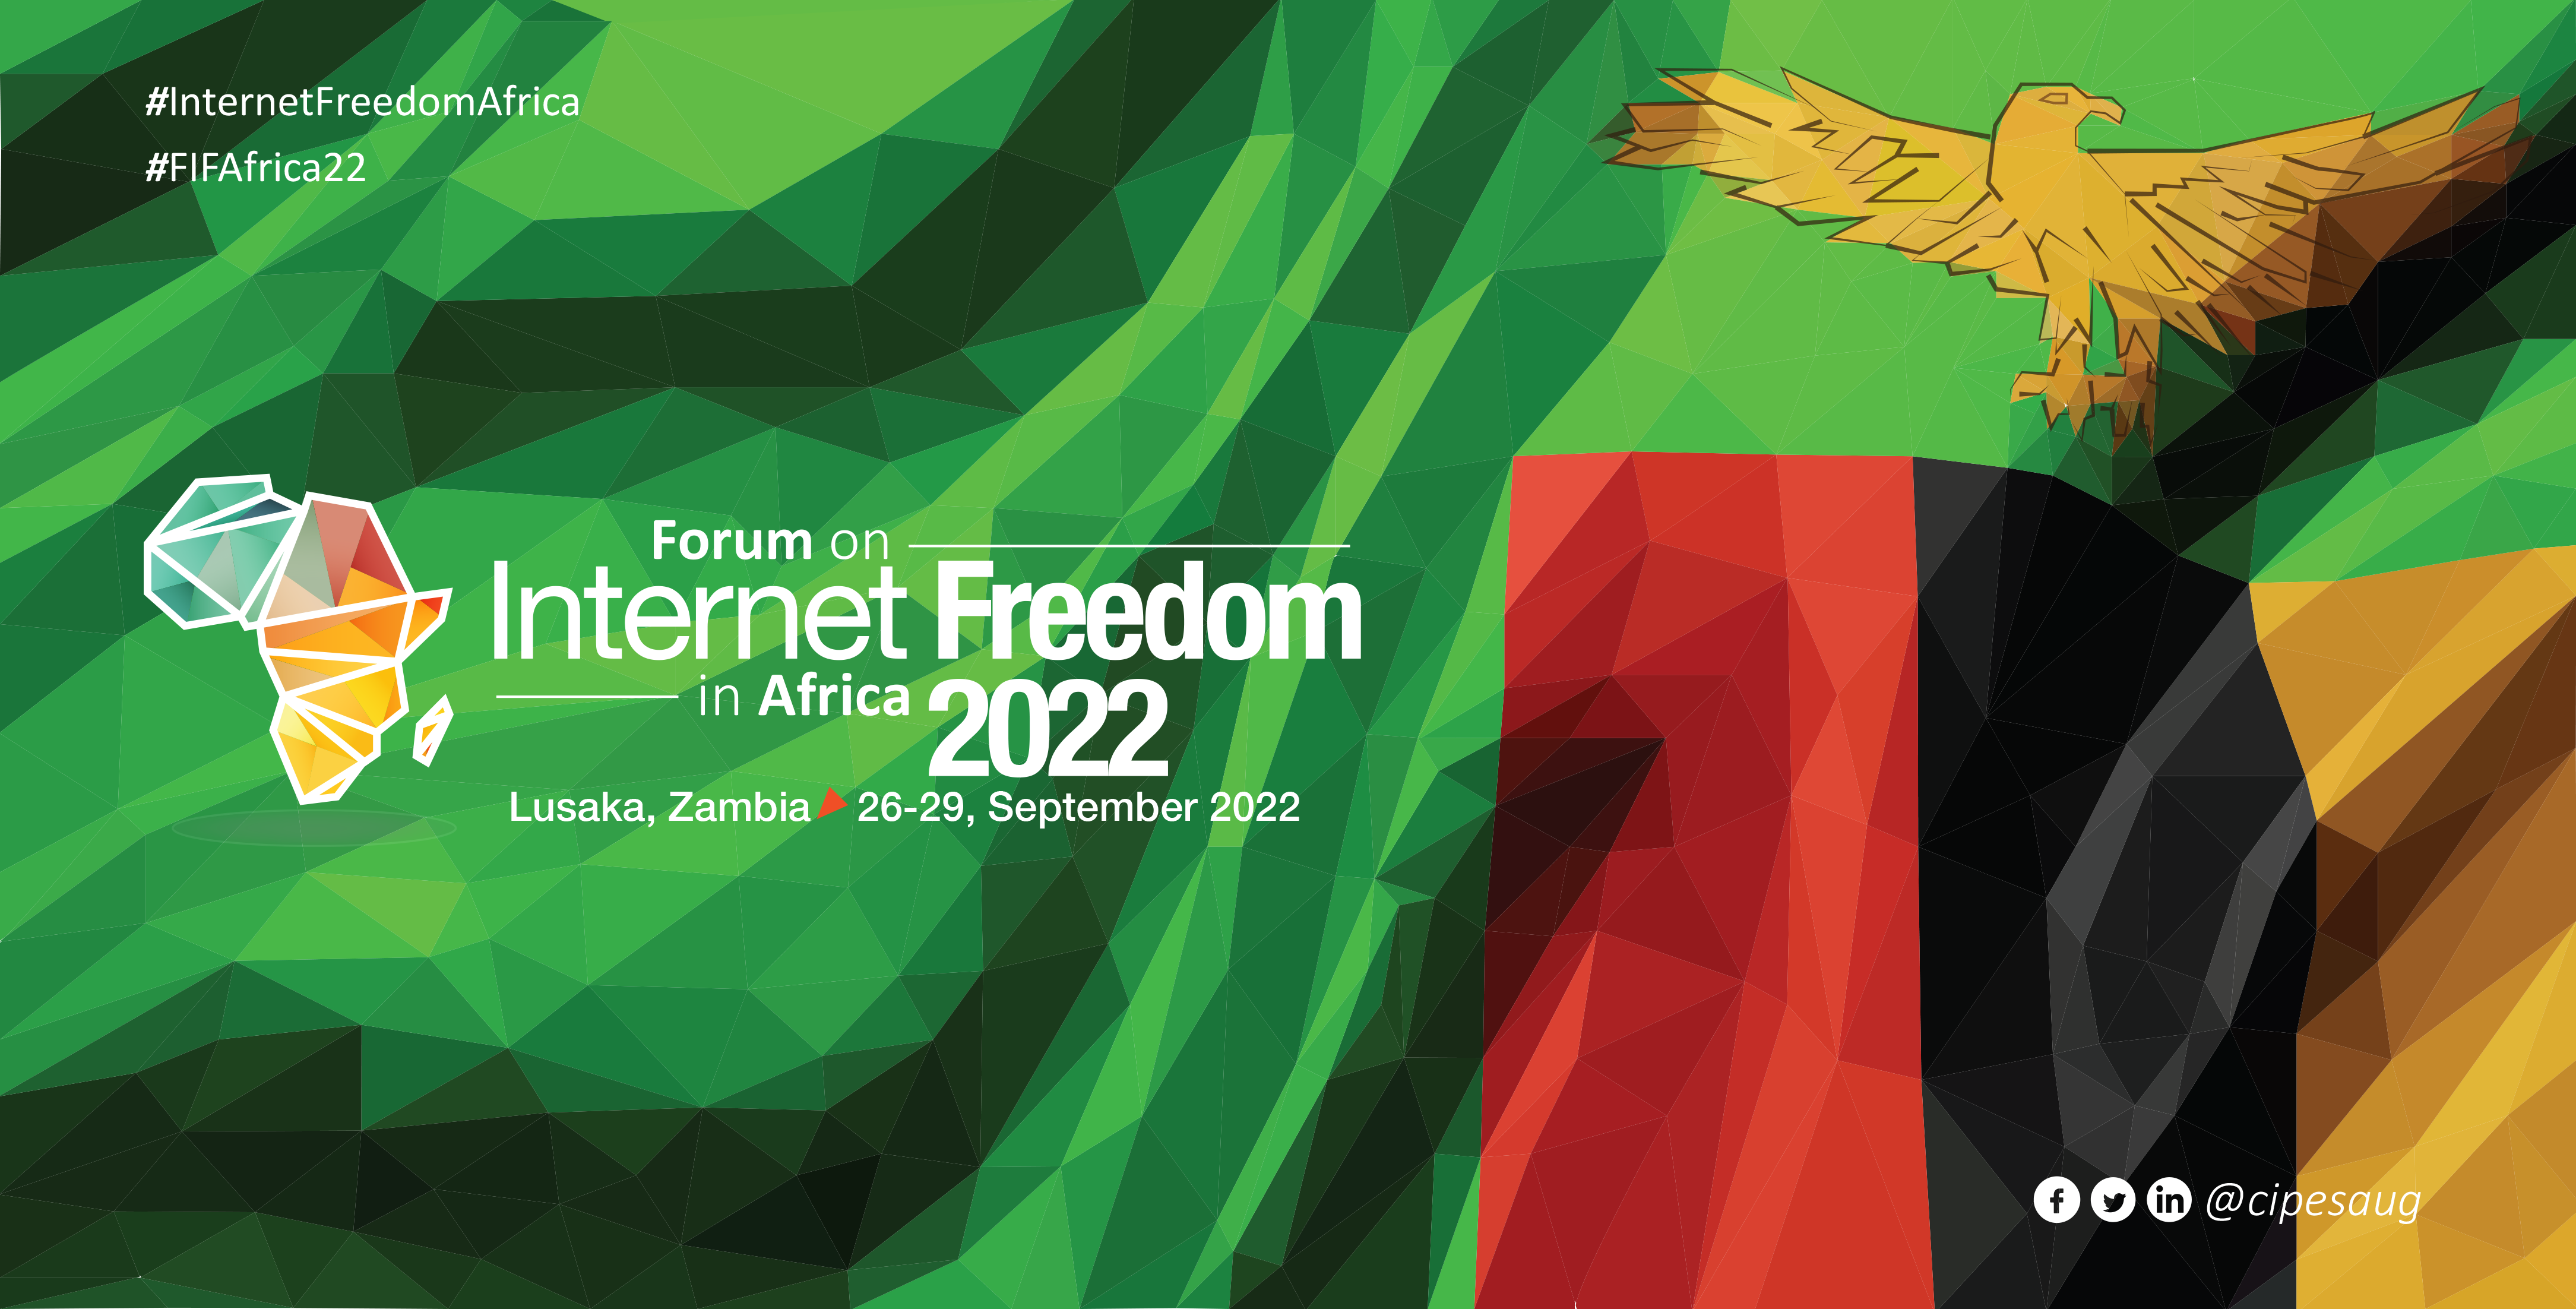 Forum on Internet Freedom in Africa 2022 (#FIFAfrica22):  Four Days of Workshops, Exhibitions, Panel Discussions and More!